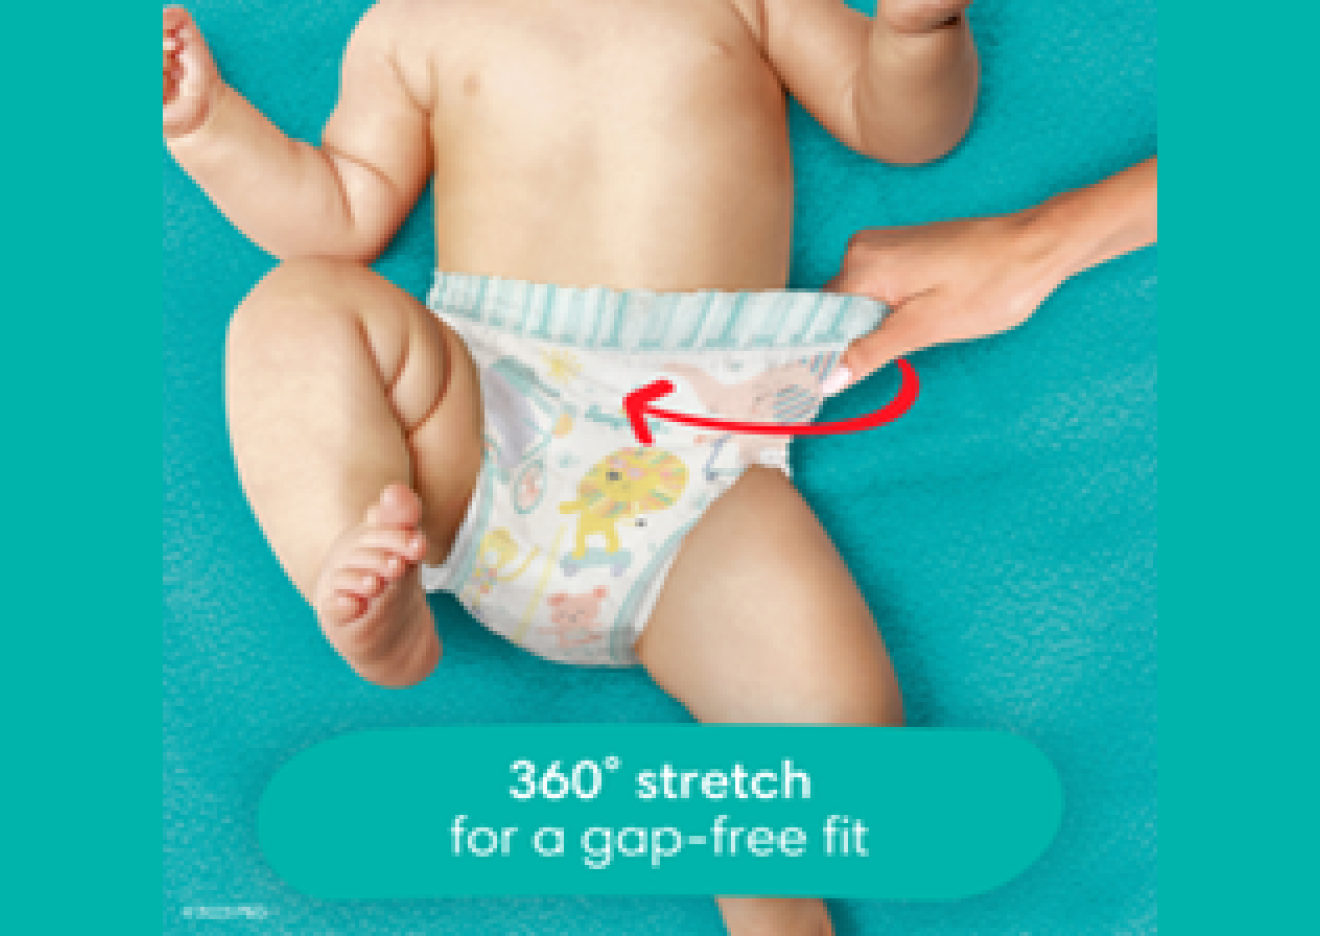 Pampers Couches Baby Dry Pants Extra Large taille 7 